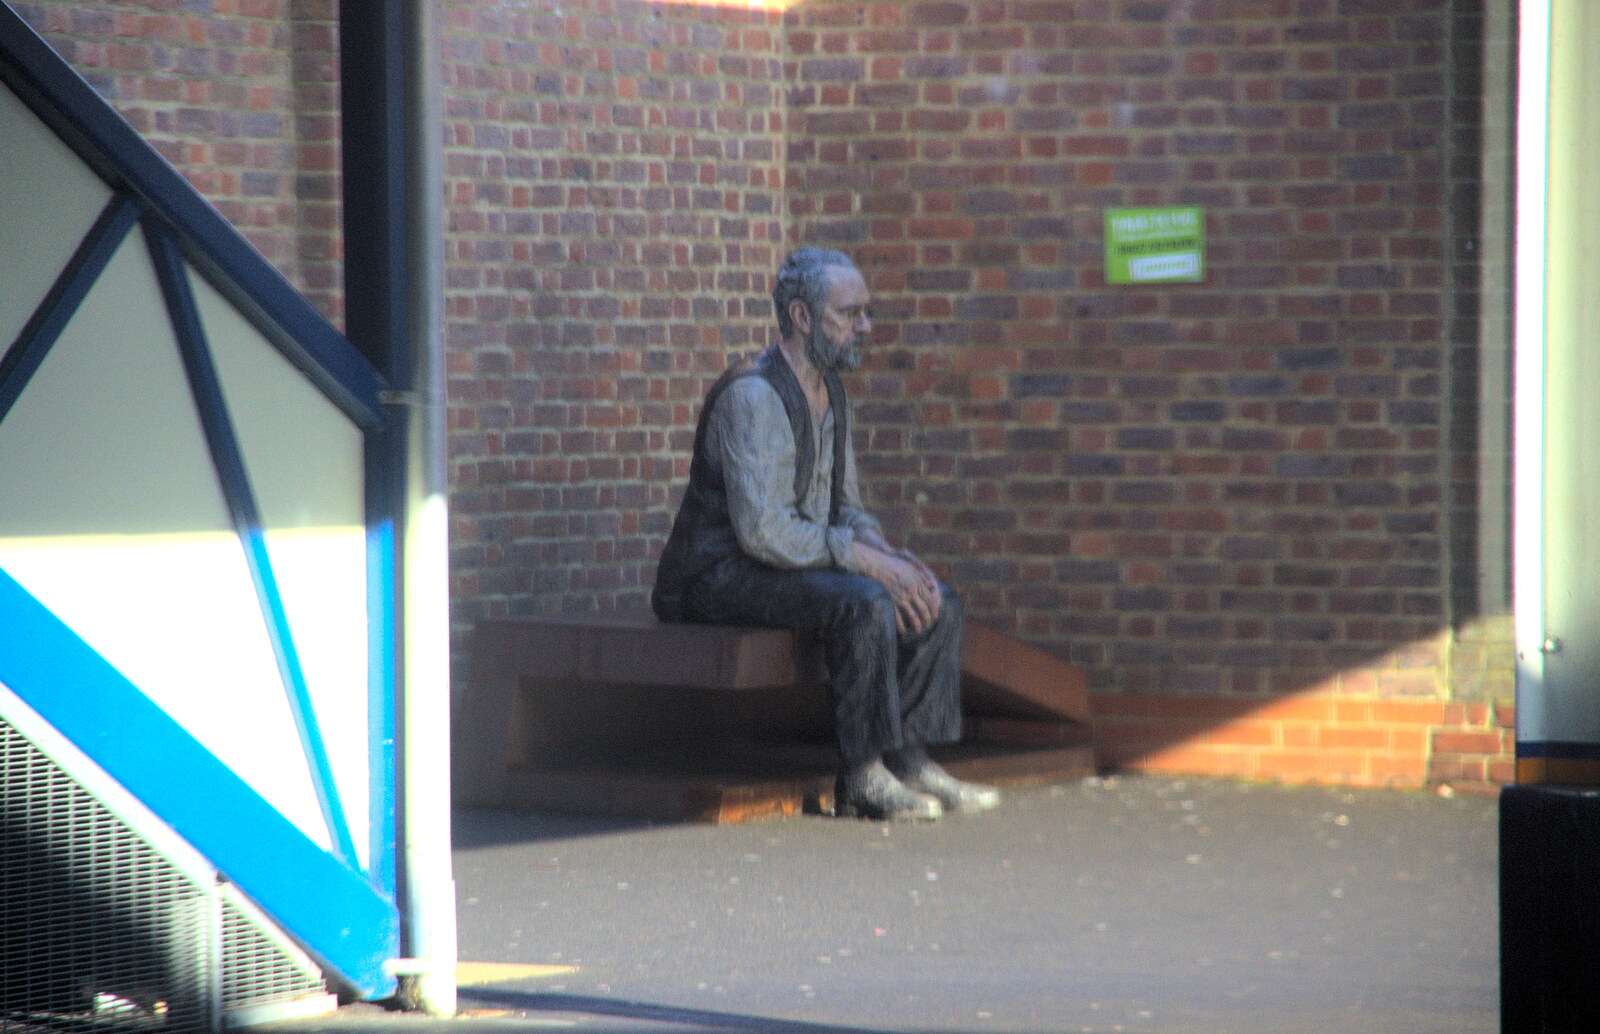 The Seated Man by Sean Henry, at Woking station from A Wintry Trip Down South, Walkford, Dorset - 1st February 2019